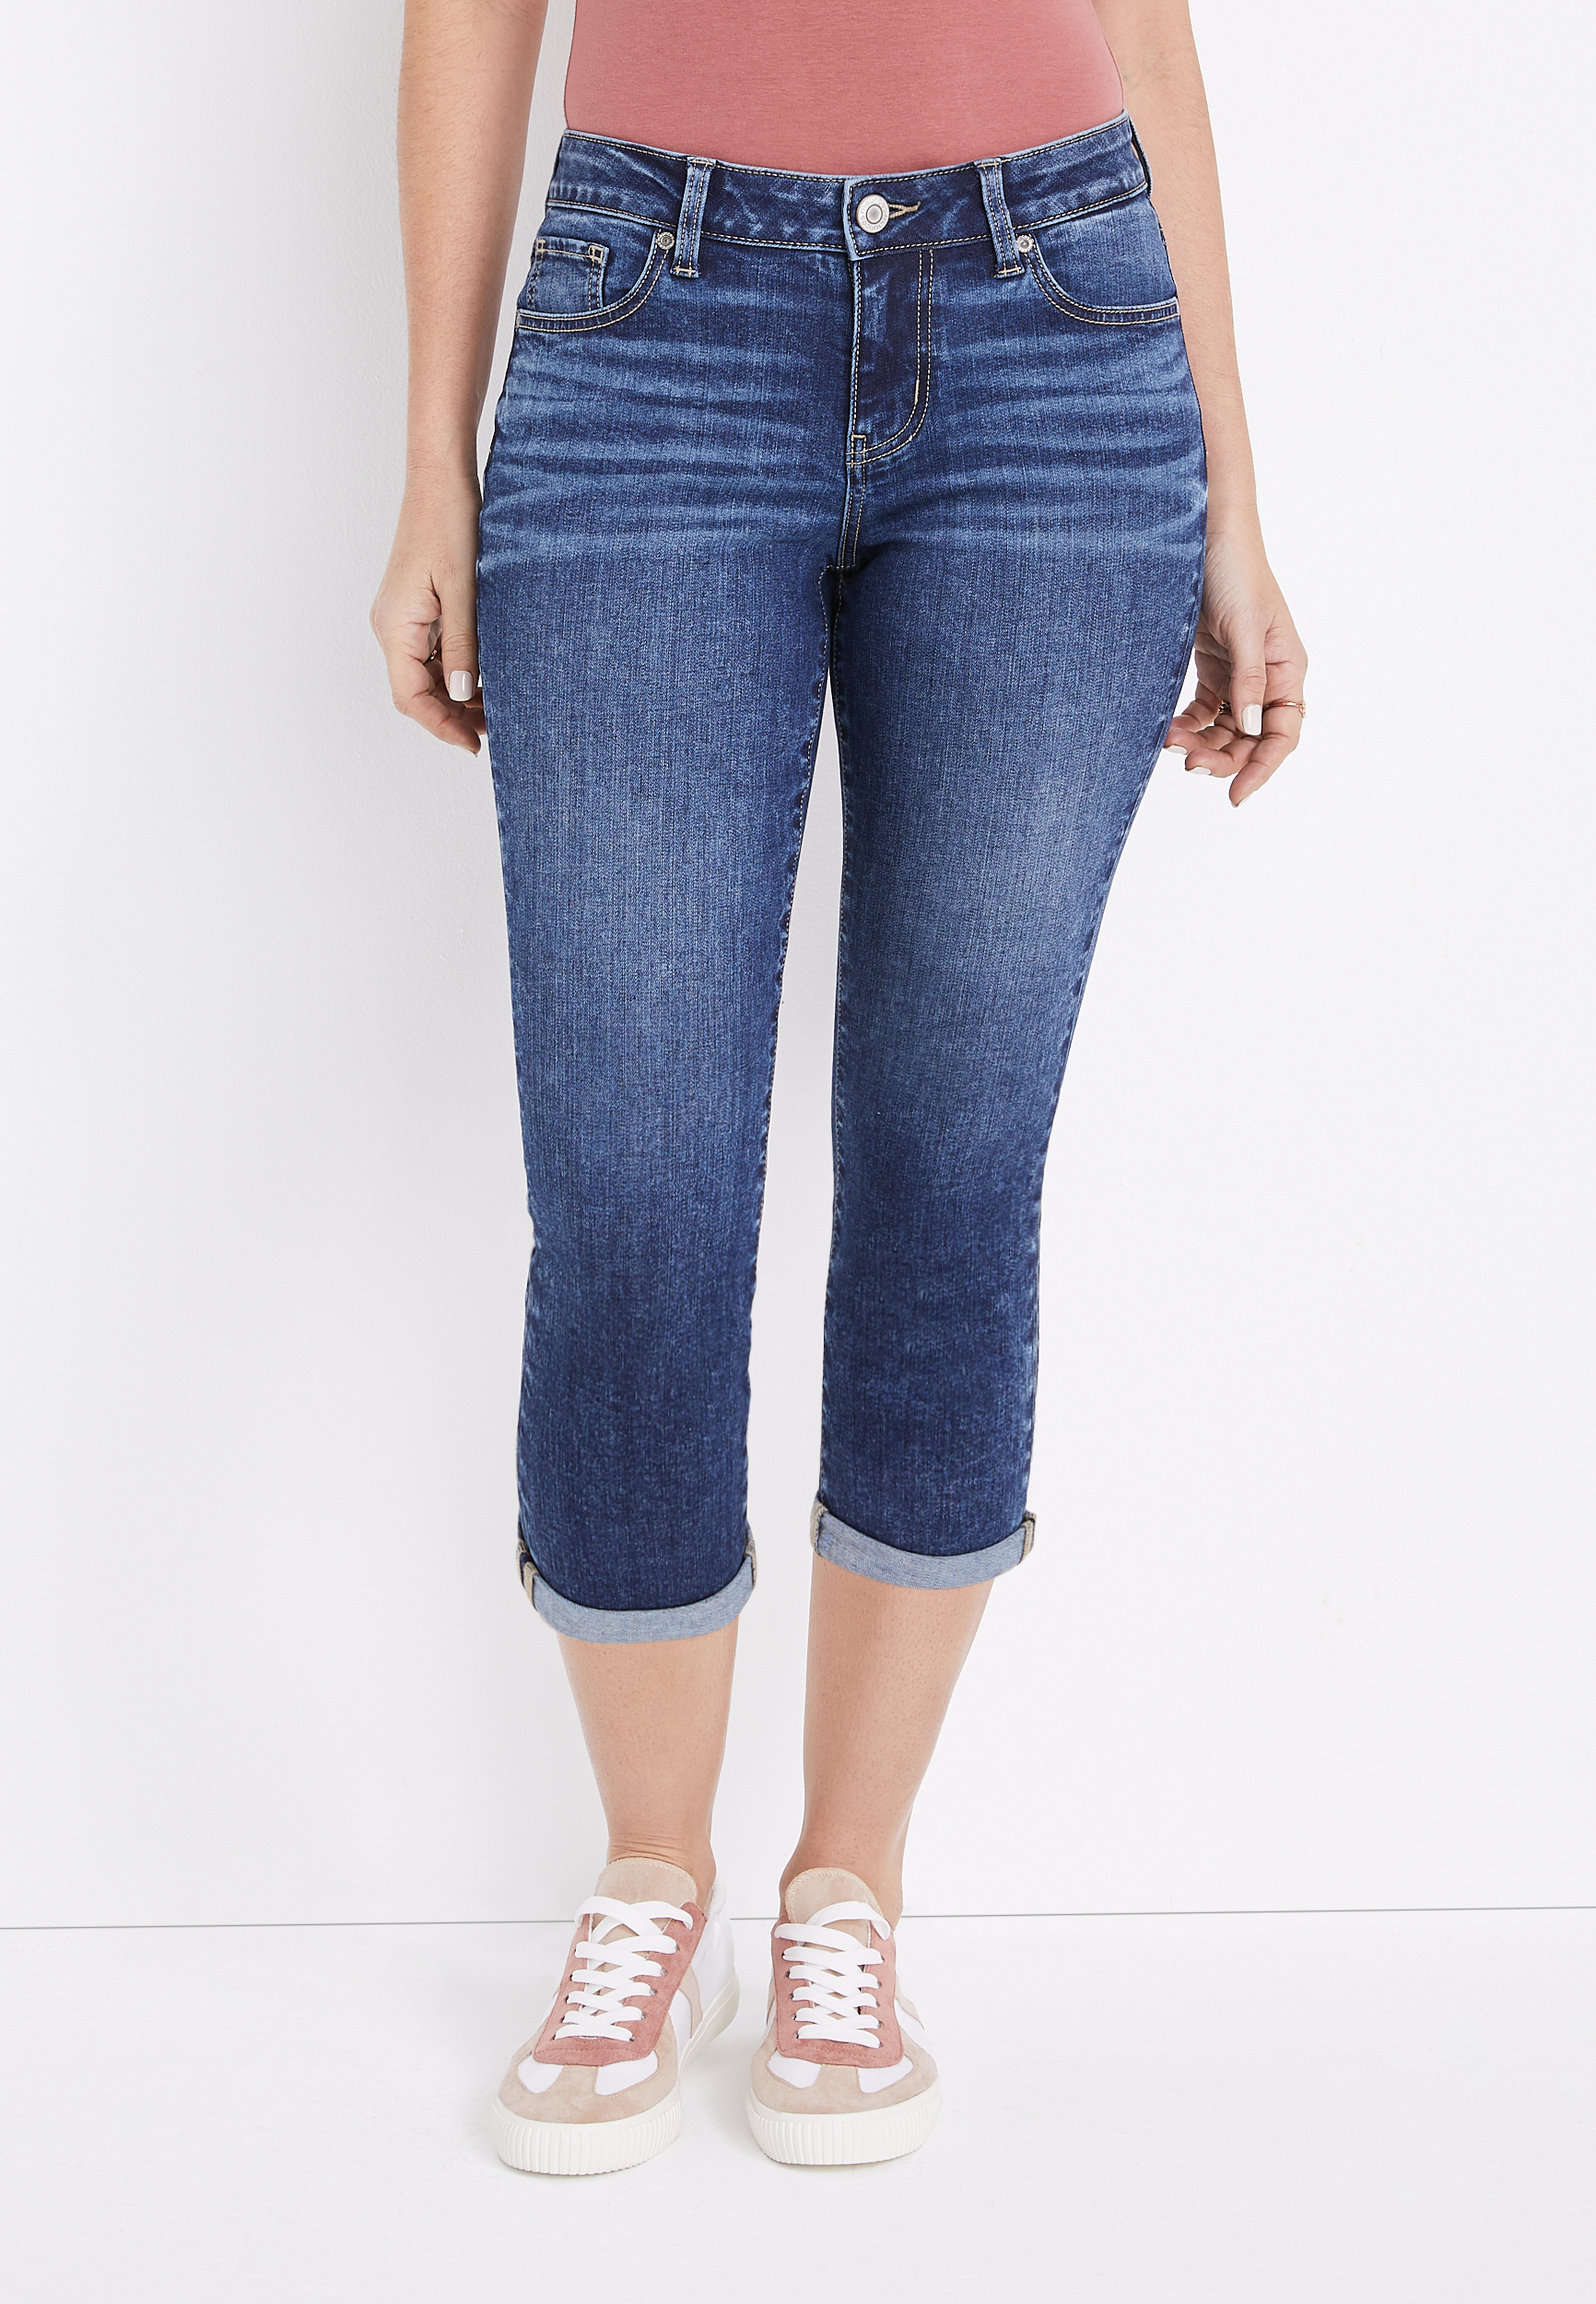 m jeans by maurices™ Mid Rise Rolled Hem Capri | maurices